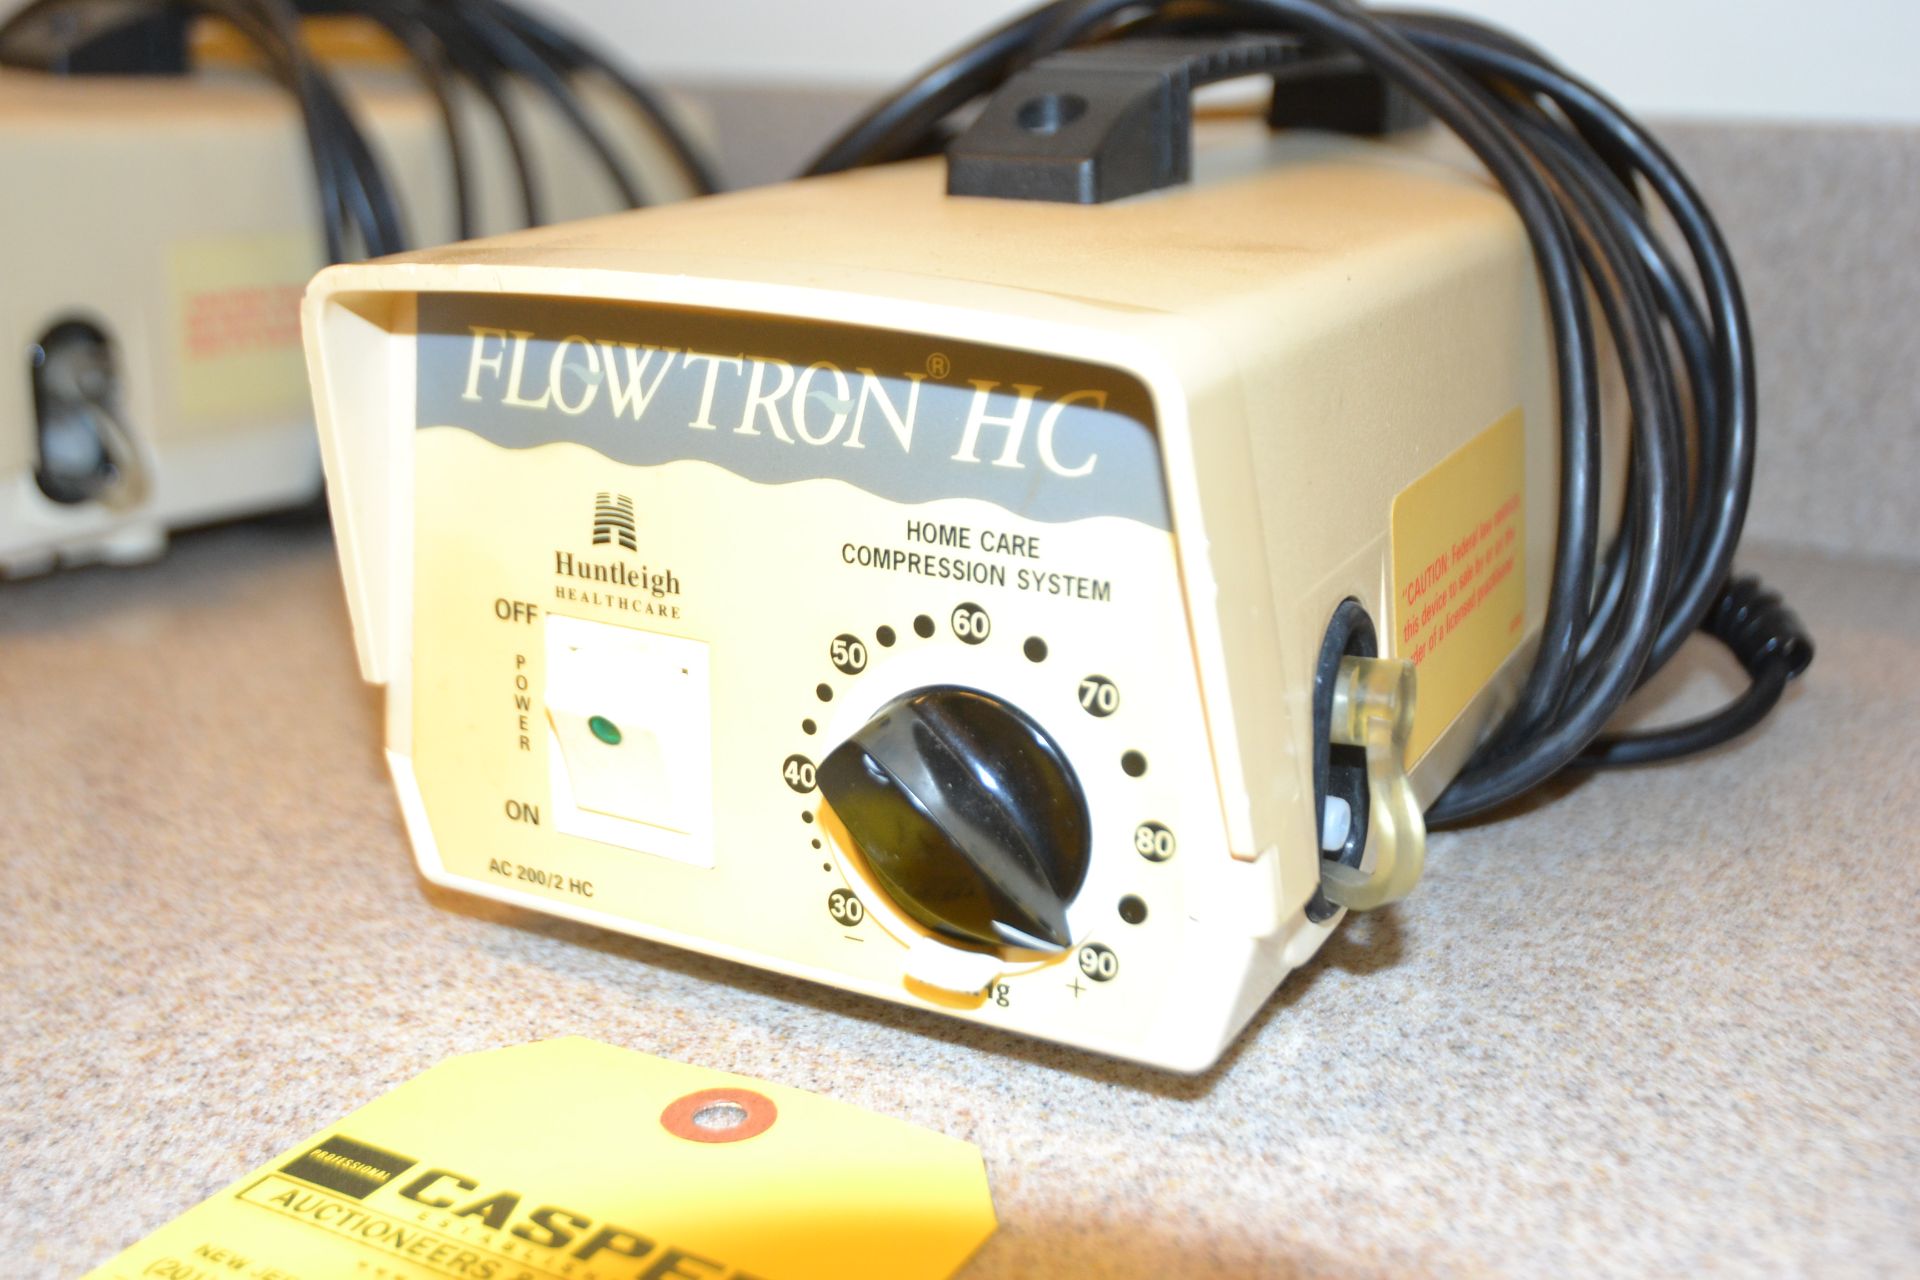 Huntleigh Home Care Compression System Flowtron HC, Model# AC200-2HC - Image 2 of 2